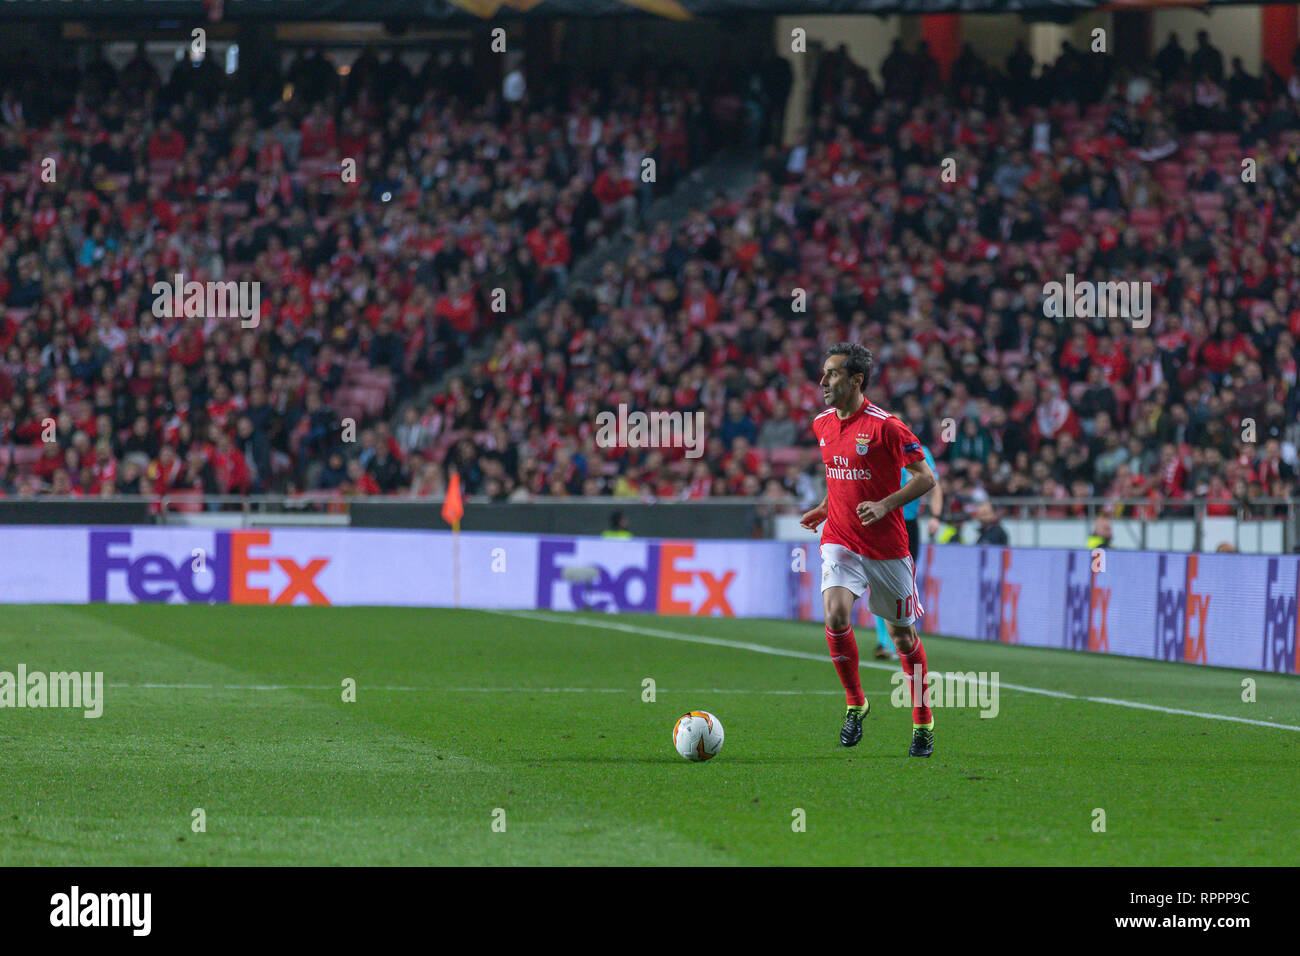 Lisbon, Portugal. 21st Feb, 2019. February 21, 2019. Lisbon, Portugal. Benfica's forward from Brazil Jonas (10) in action during the game of the UEFA Europa League, Round of 32, SL Benfica vs Galatasaray SK Credit: Alexandre de Sousa/Alamy Live News Stock Photo